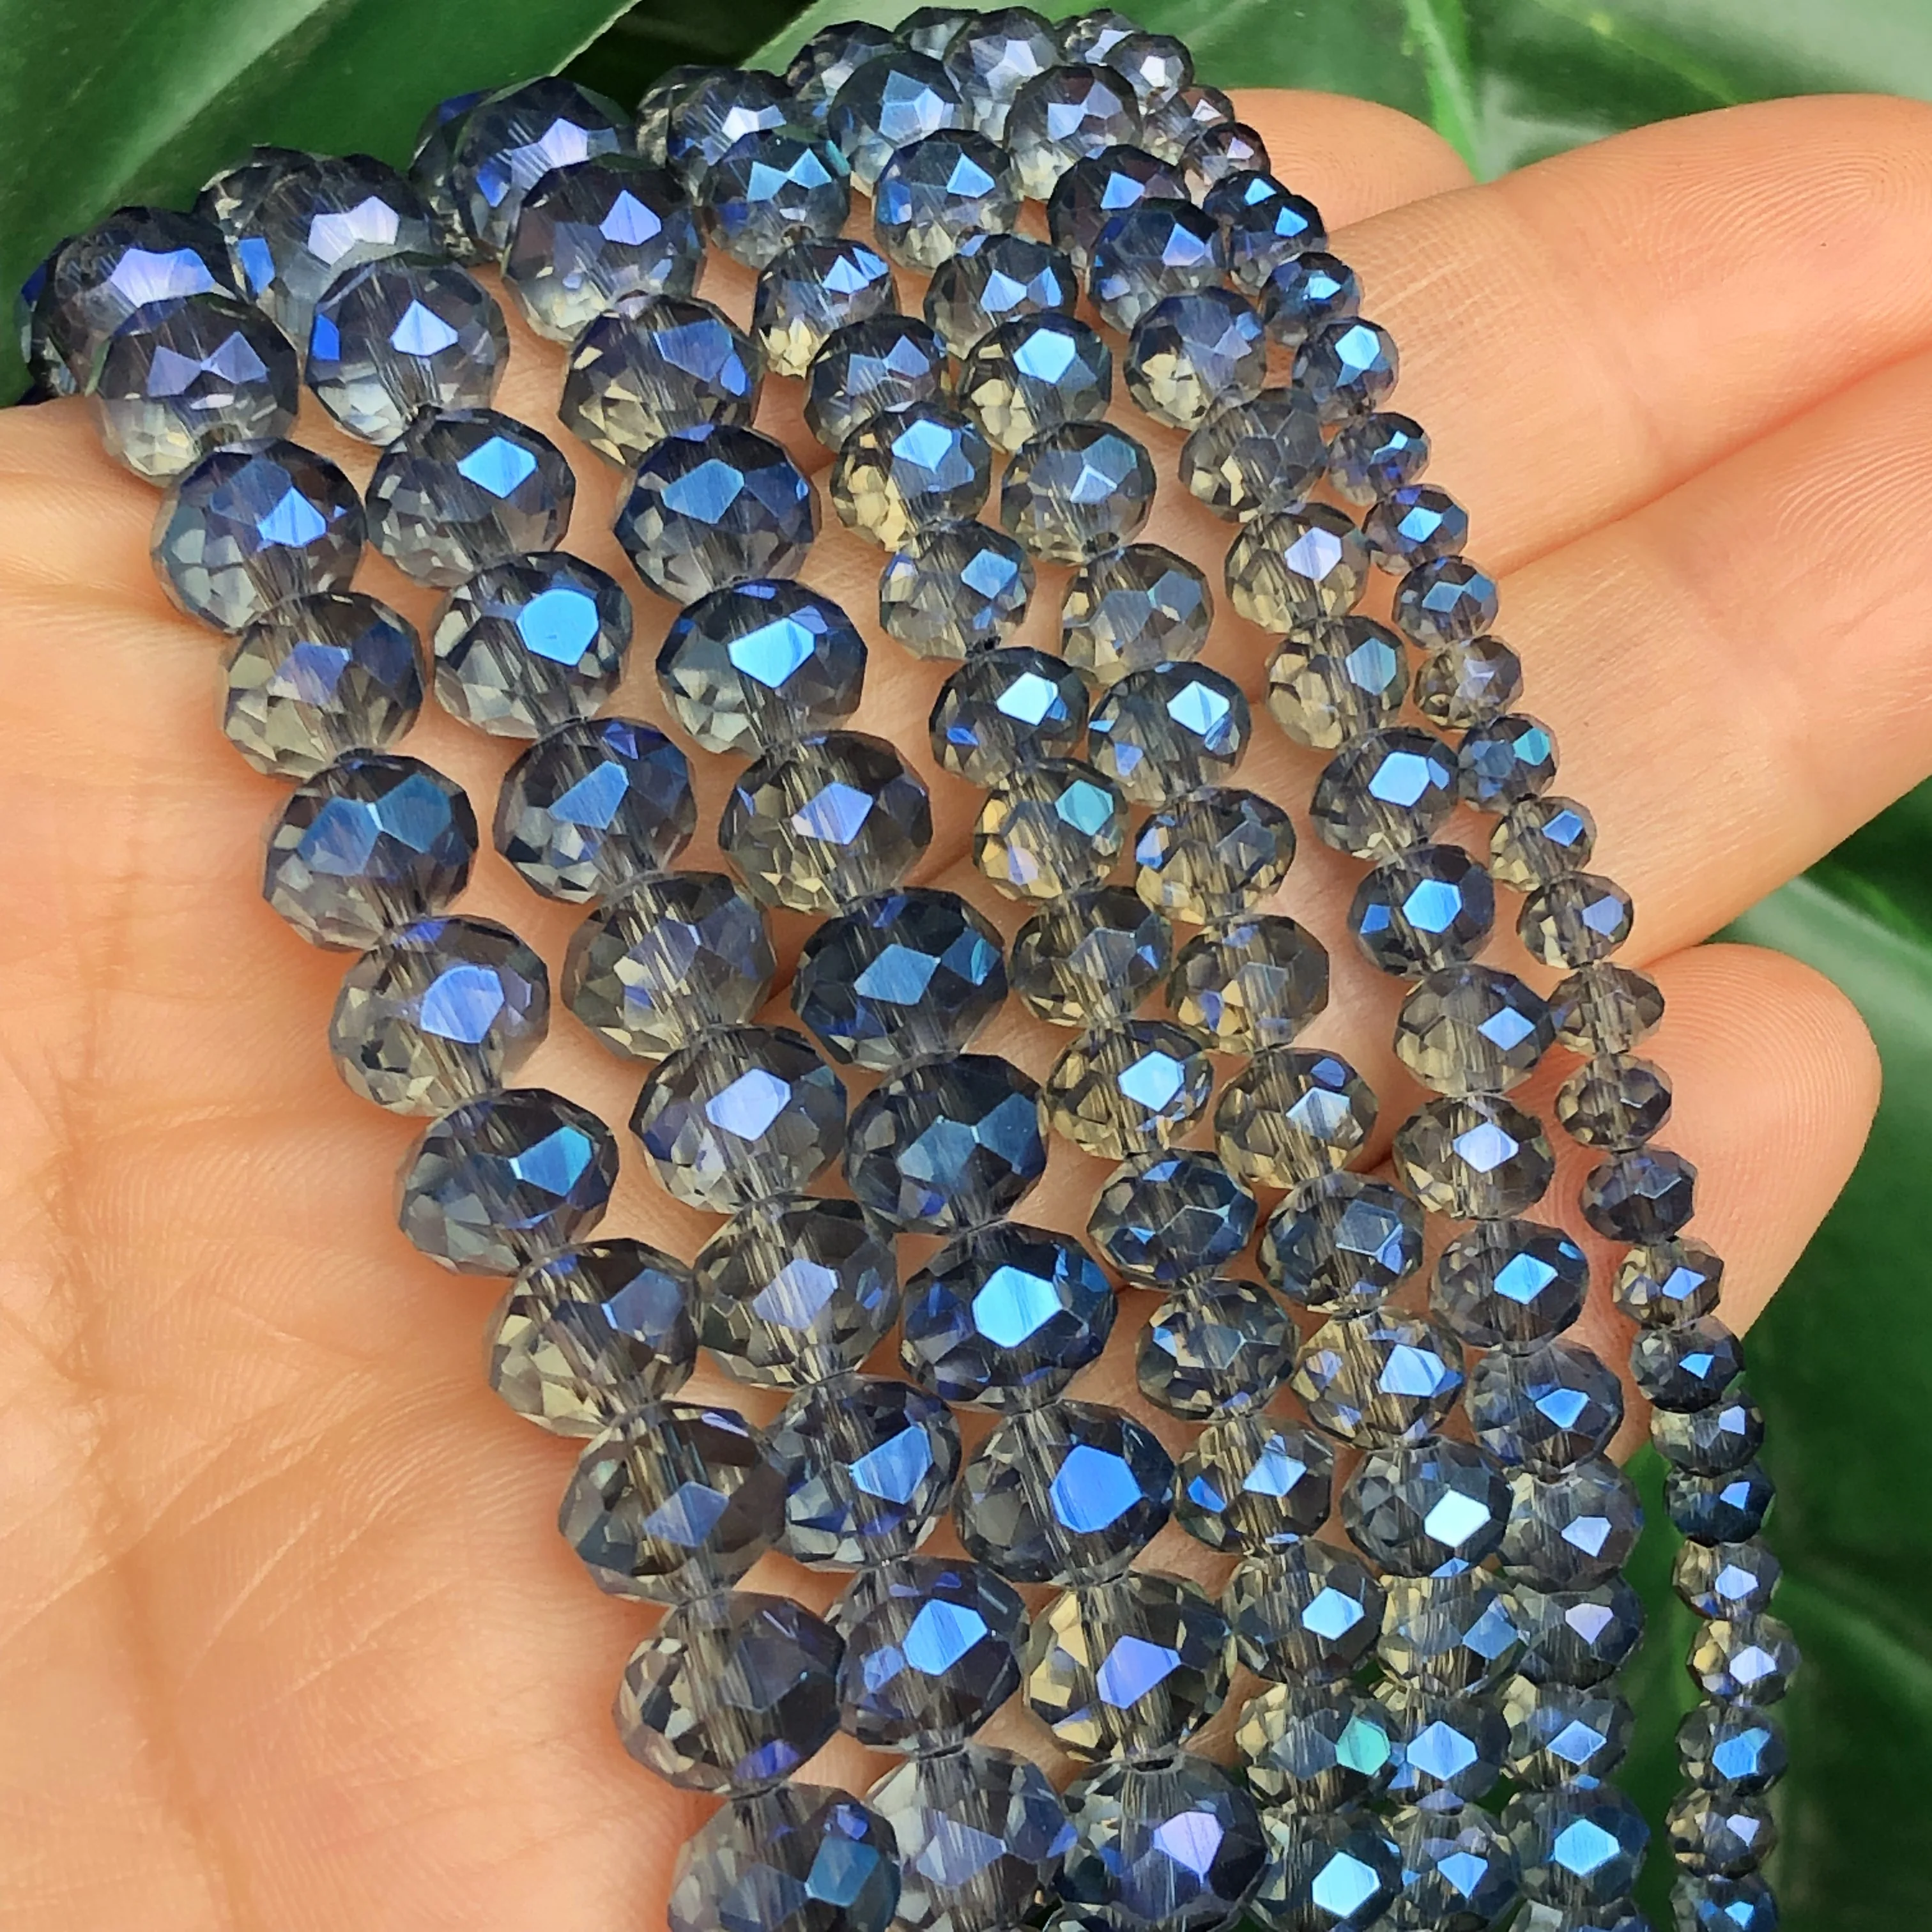 AAA quality Ink Blue Rondelle Austria Faceted Crystal Glass Beads Loose Spacer Round Beads for Jewelry Making Finding 15